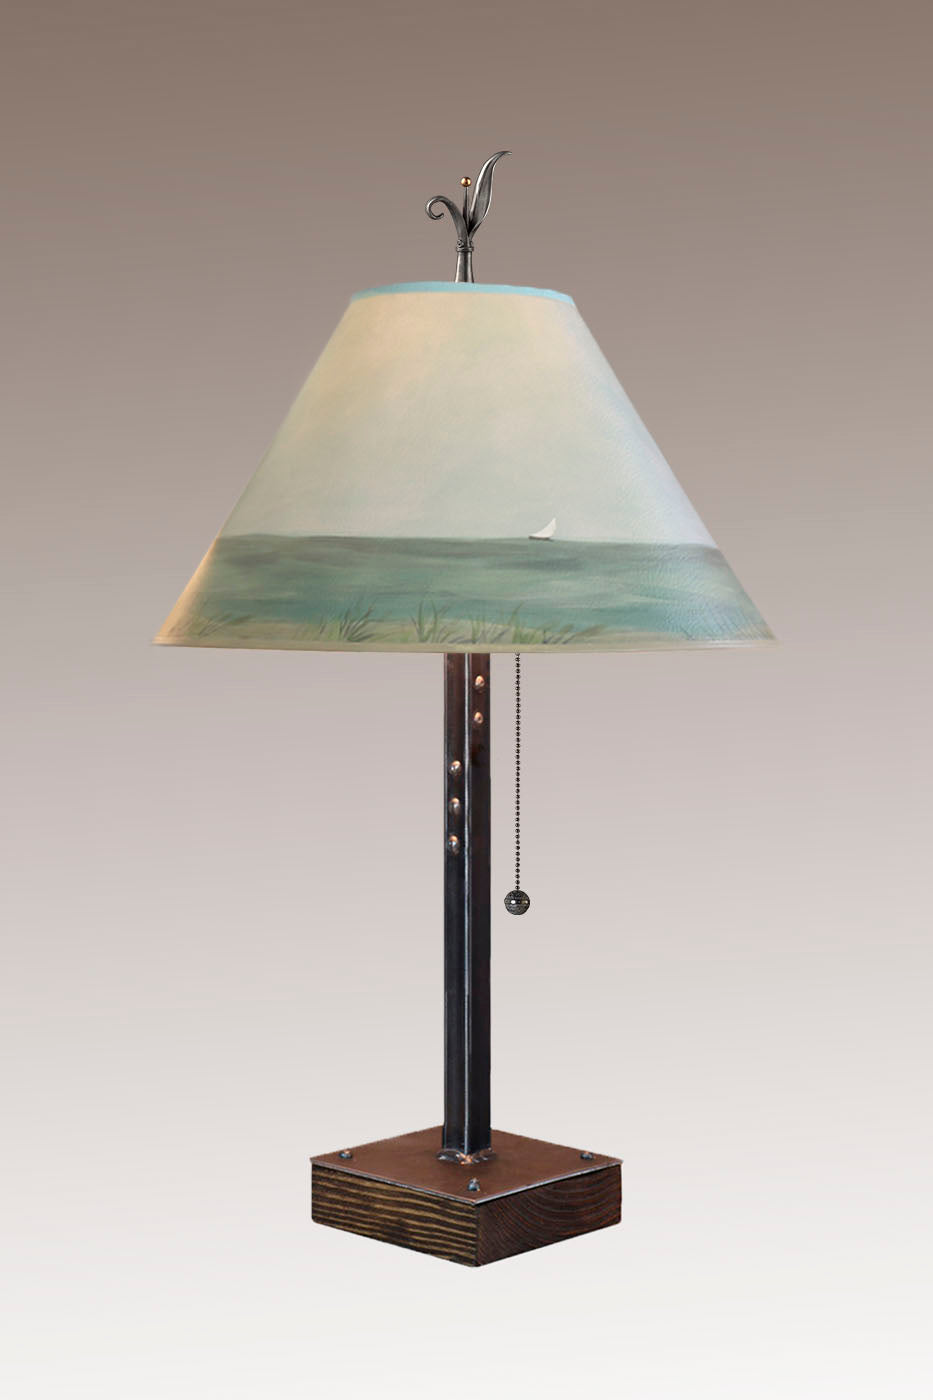 Janna Ugone &amp; Co Table Lamps Steel Table Lamp on Wood with Medium Conical Shade in Shore